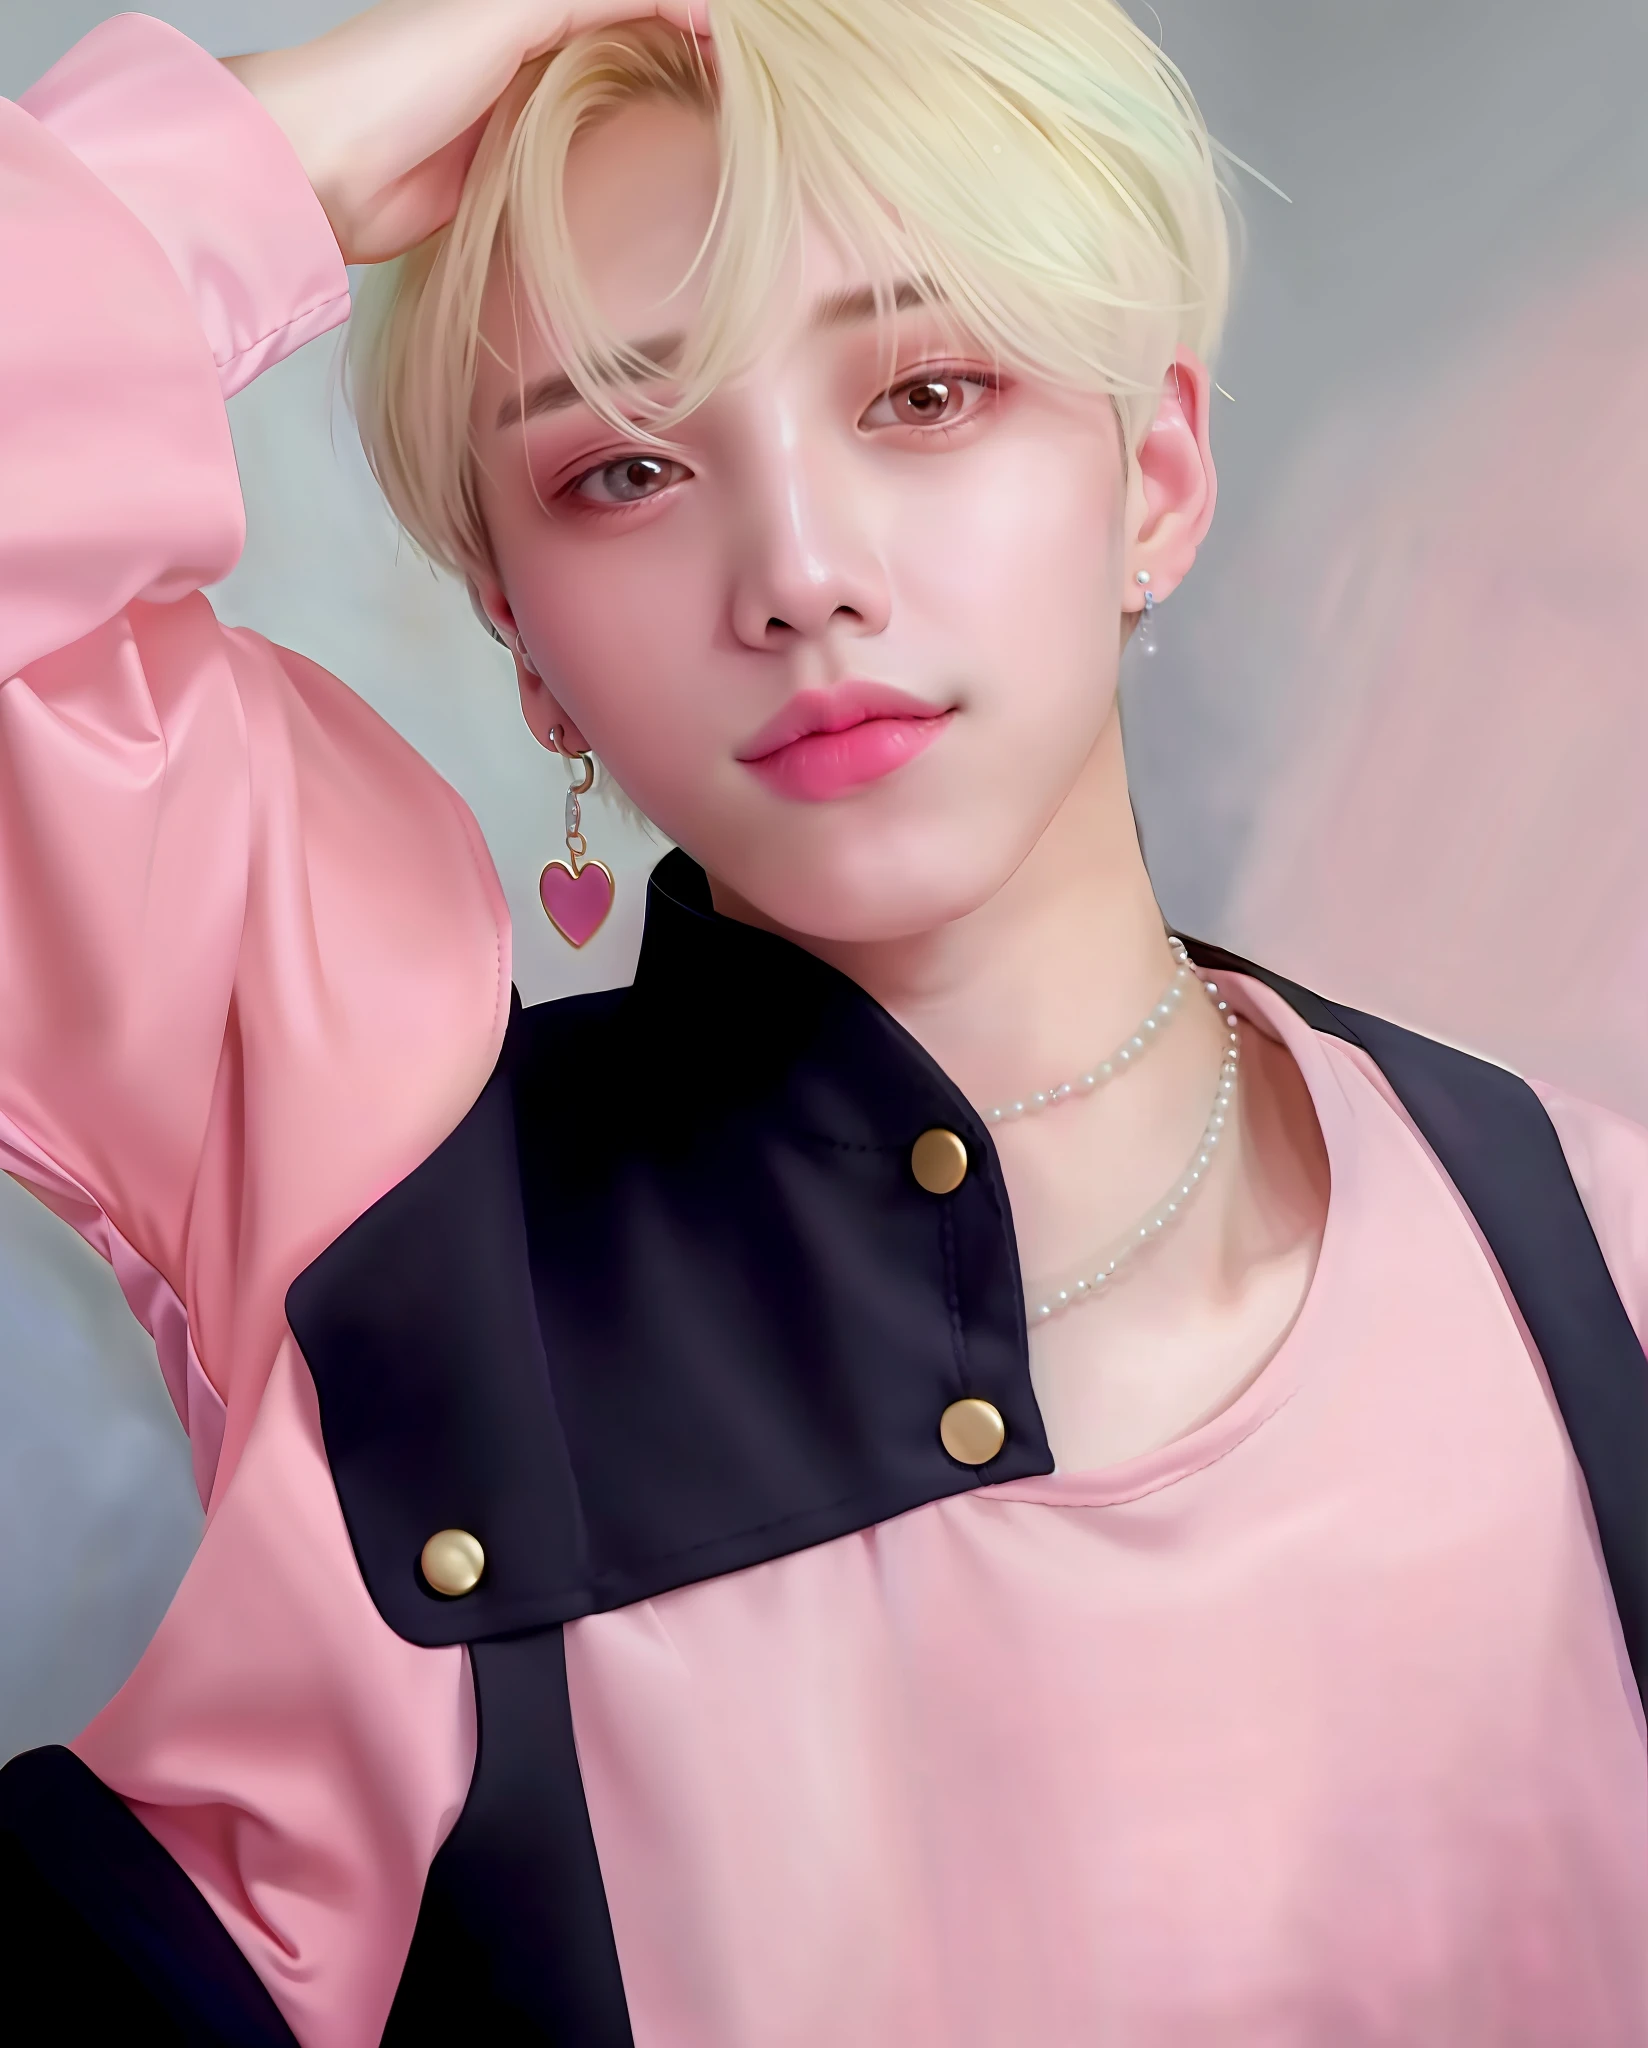 arafed image of a young man with a pink outfit, Wearing pink clothes, with choker no His neck, kim doyoung, cute boy, 1boycai xukun, jinyoung shin, male ulzzang, hong june hyung, inspired by jeonseok lee, hyung tae, portrait of kpop idol, an adorable korean face, yanjun chengt, happy, heart symbol with his hand, cheers, 8k, 16k, raw photography, masterpiece, uhd, sexy, blush cheeks, male idol, flat chest,